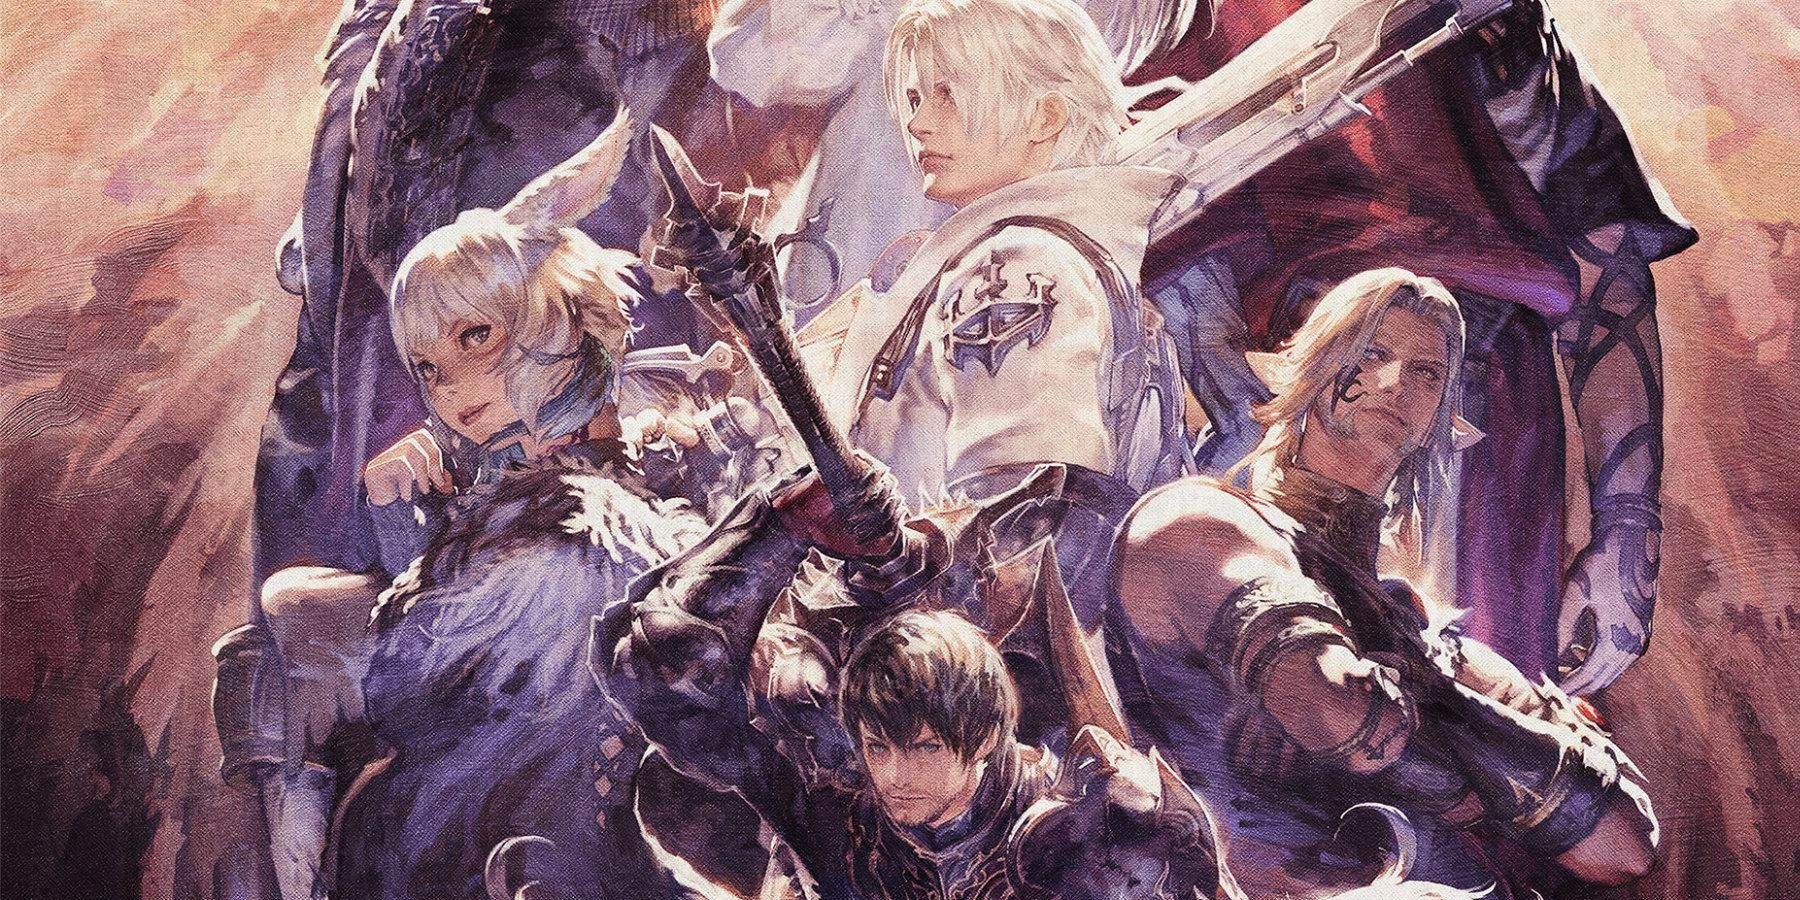 Some of the main characters in FF14